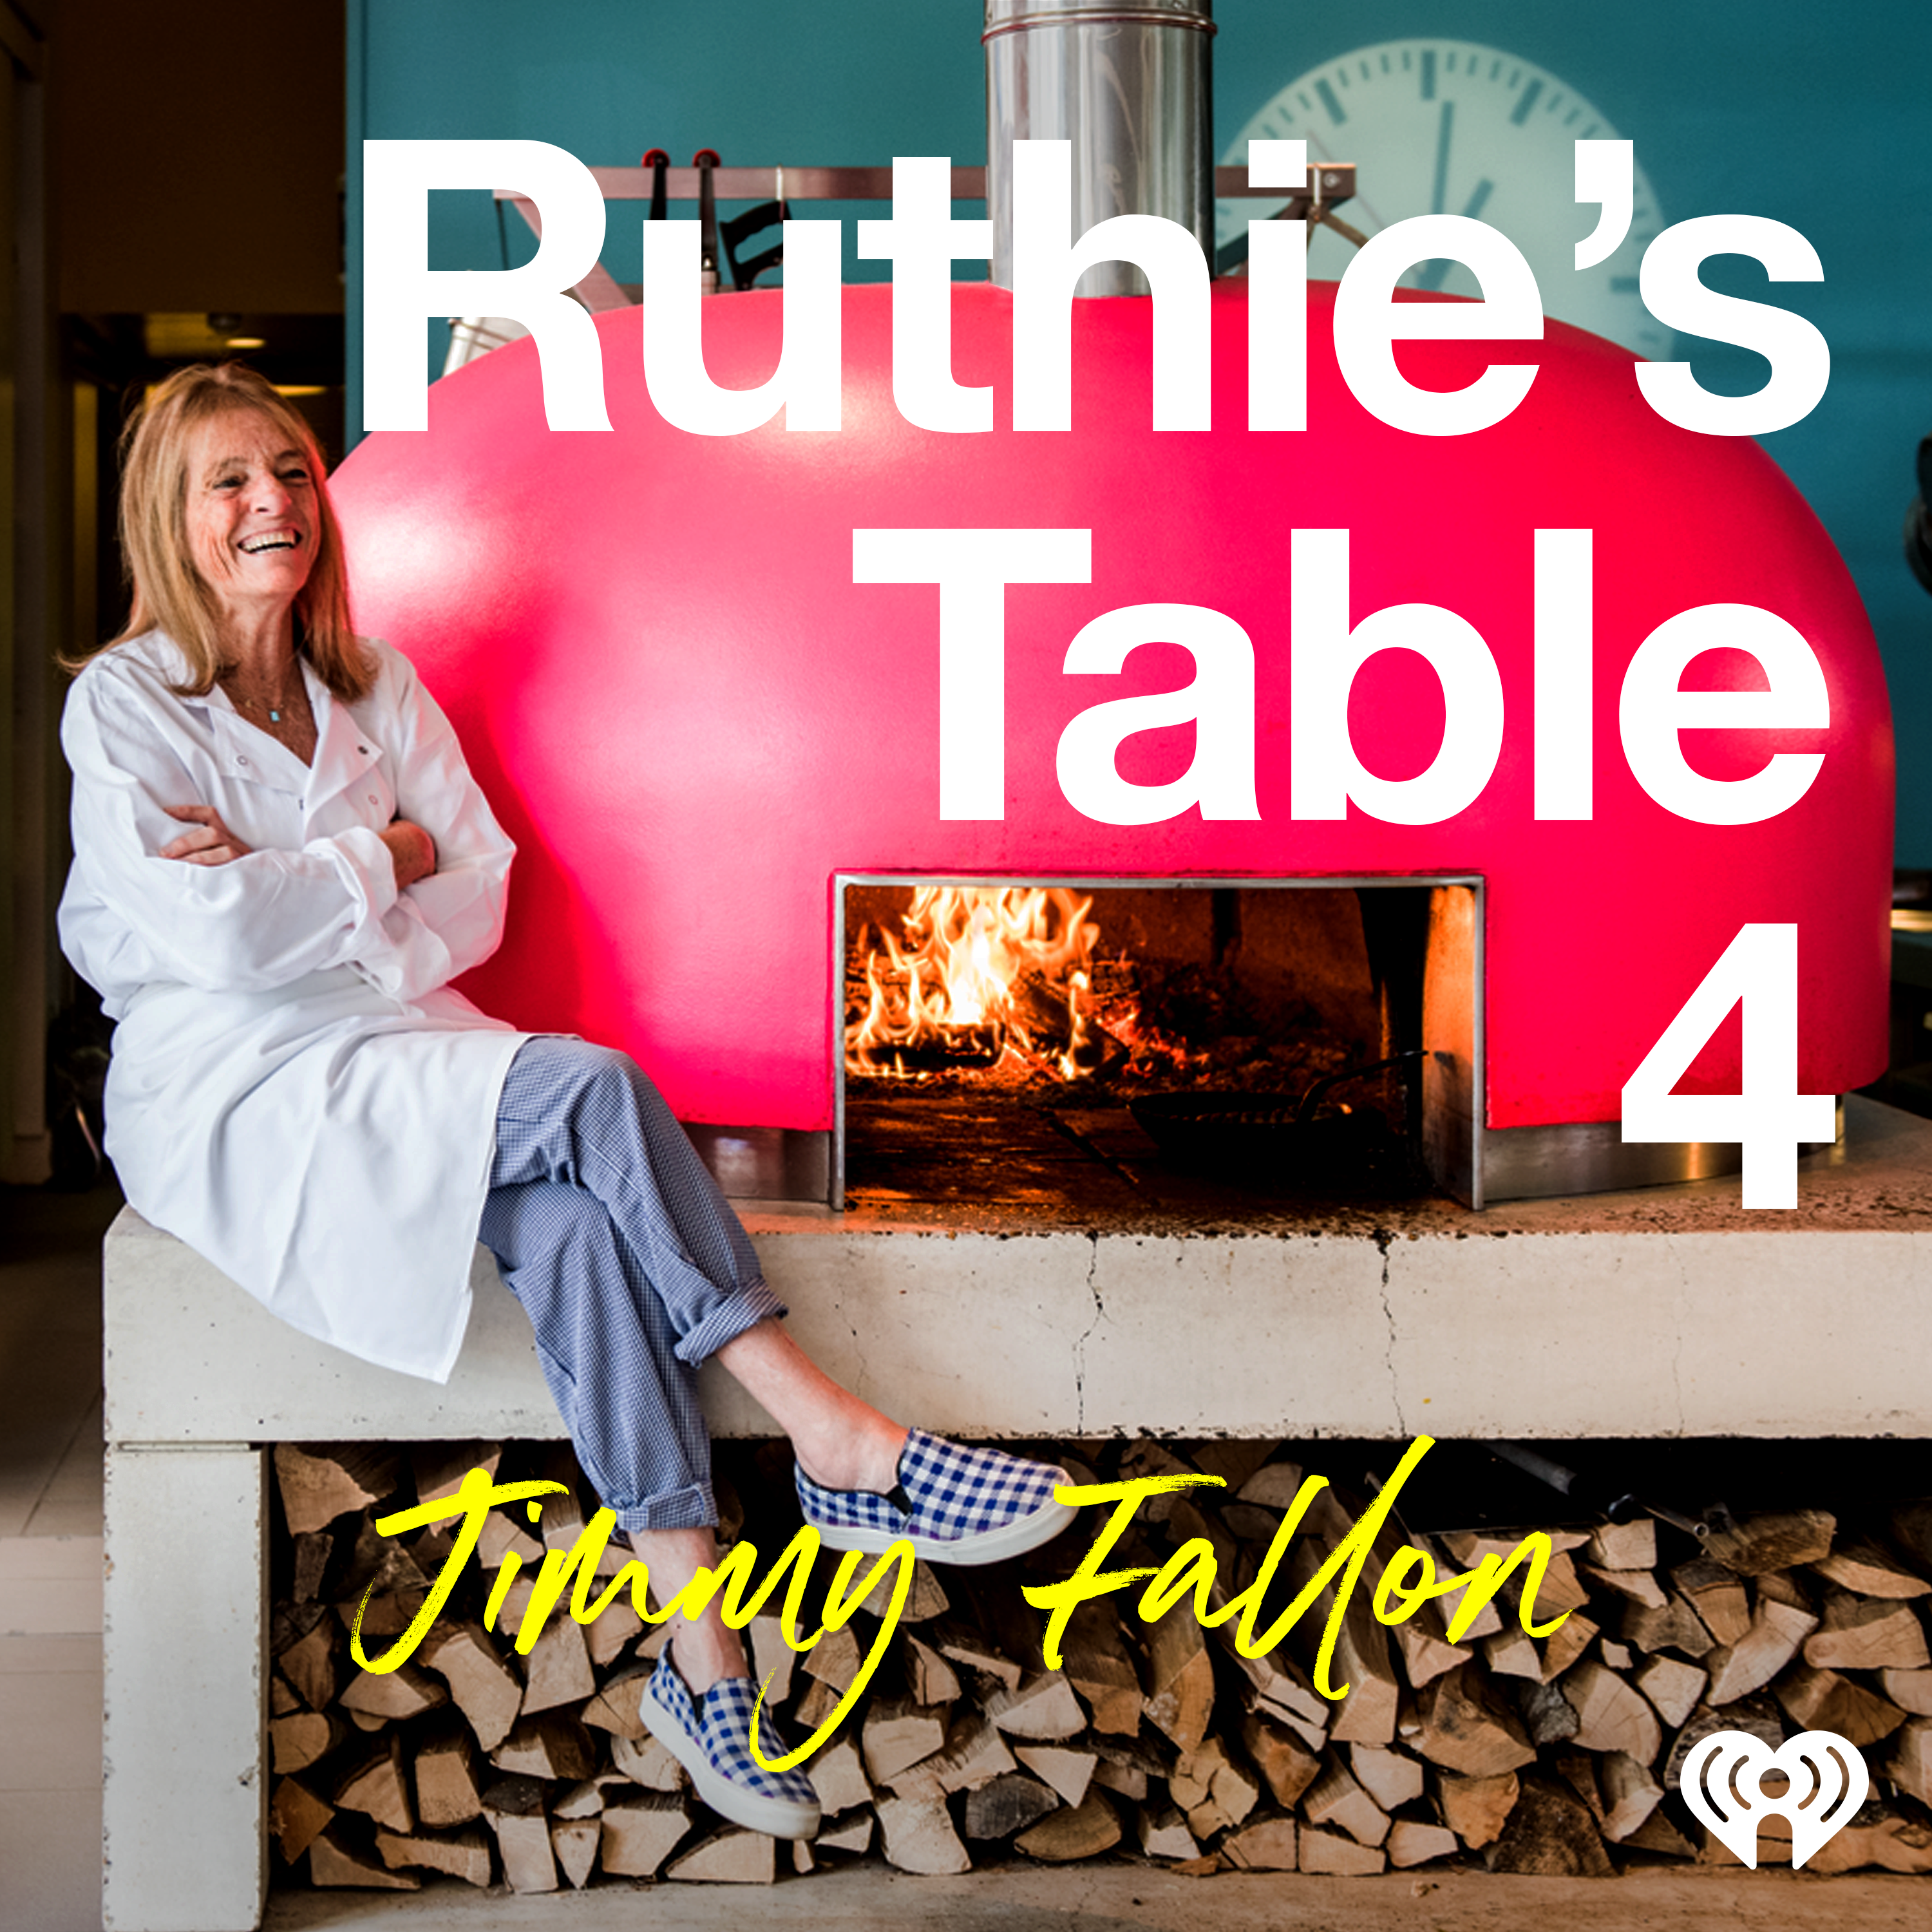 Ruthie's Table 4: Jimmy Fallon